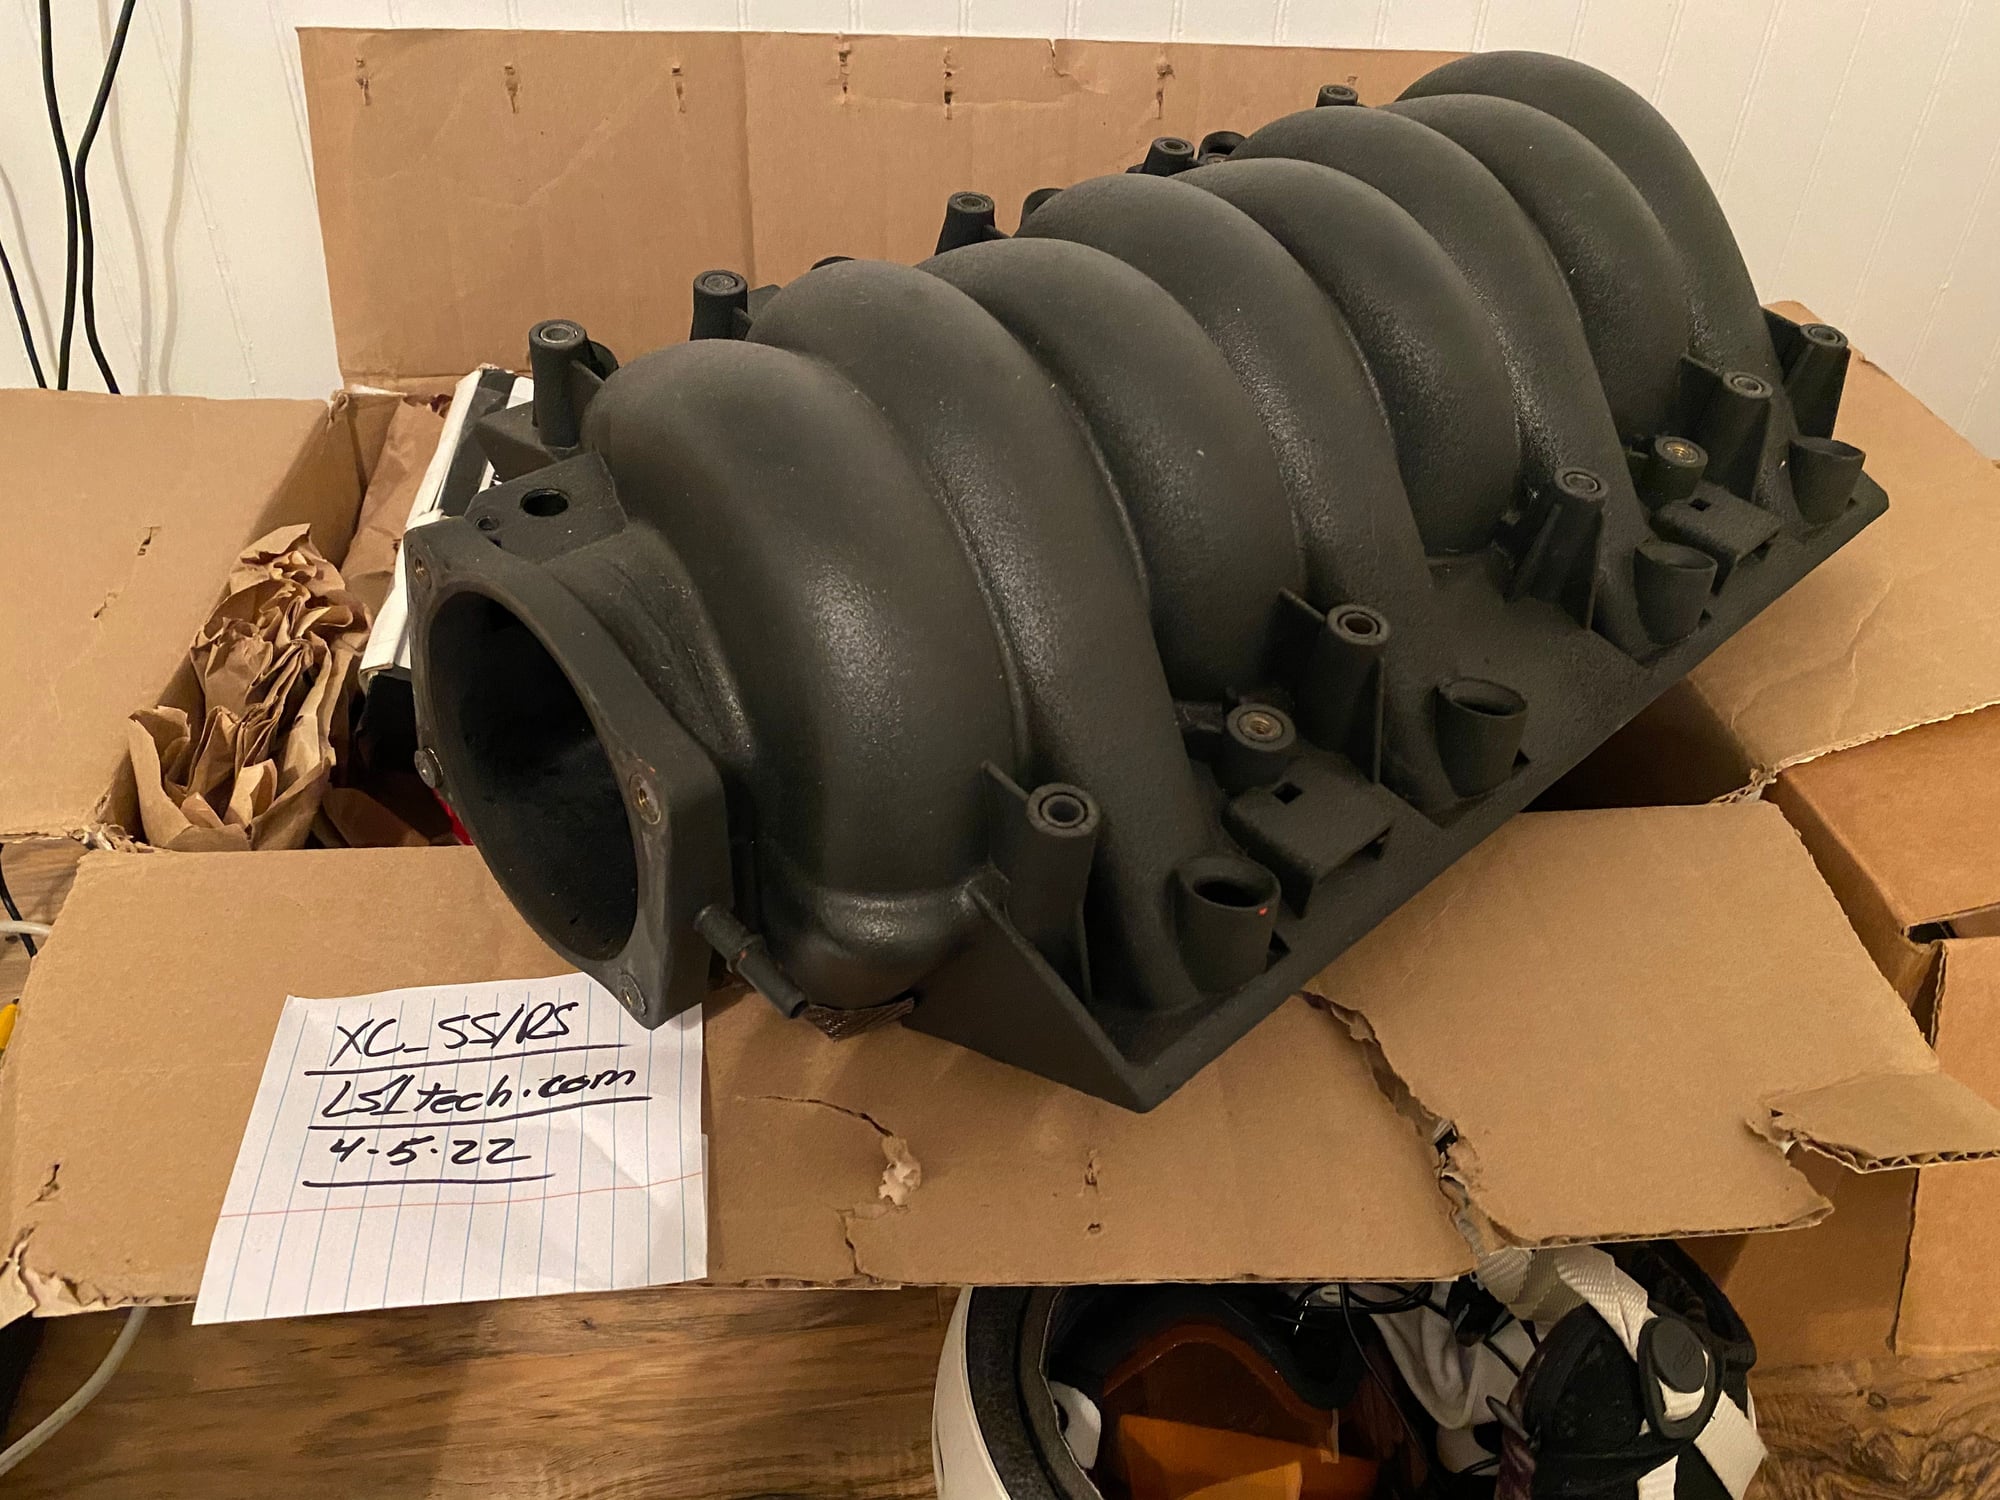 Engine - Intake/Fuel - 5th Gen Camaro/LS3 parts FS - Used - 0  All Models - Charles Town, WV 25438, United States